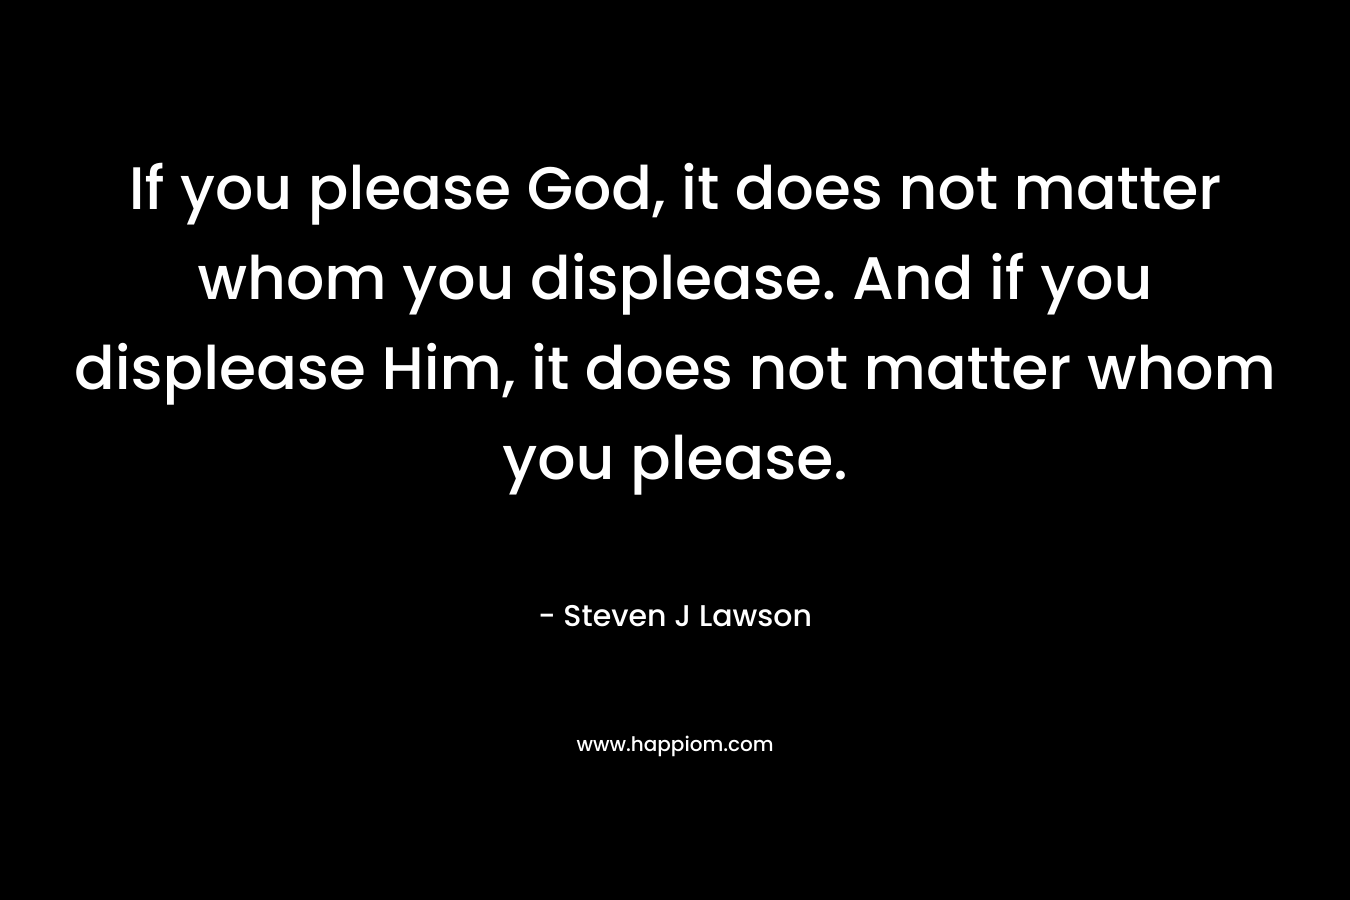 If you please God, it does not matter whom you displease. And if you displease Him, it does not matter whom you please.